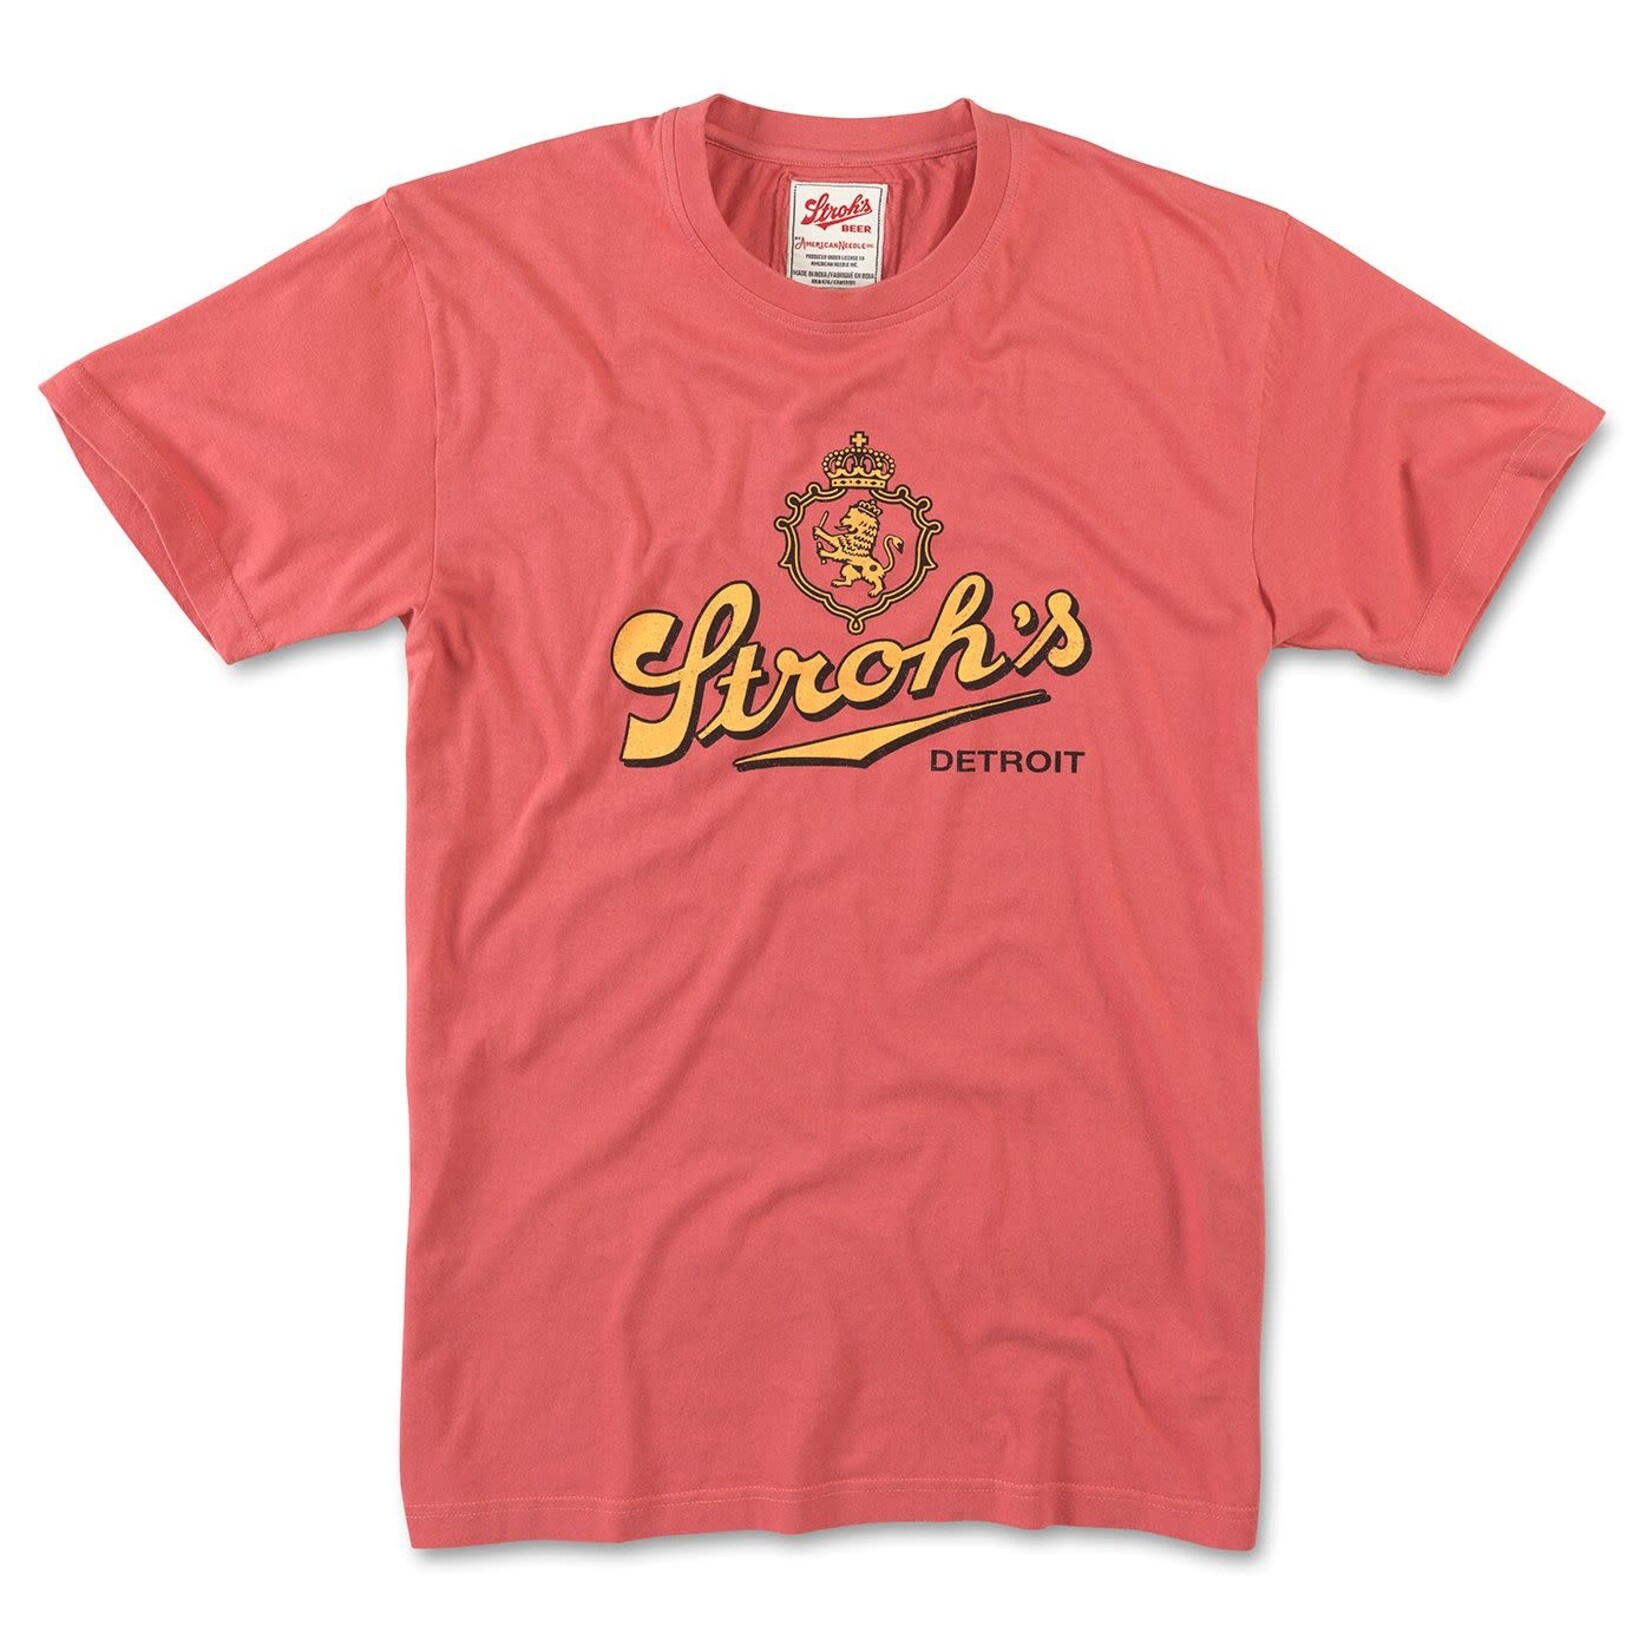 American Needle Stroh's Mineral Red T-shirt